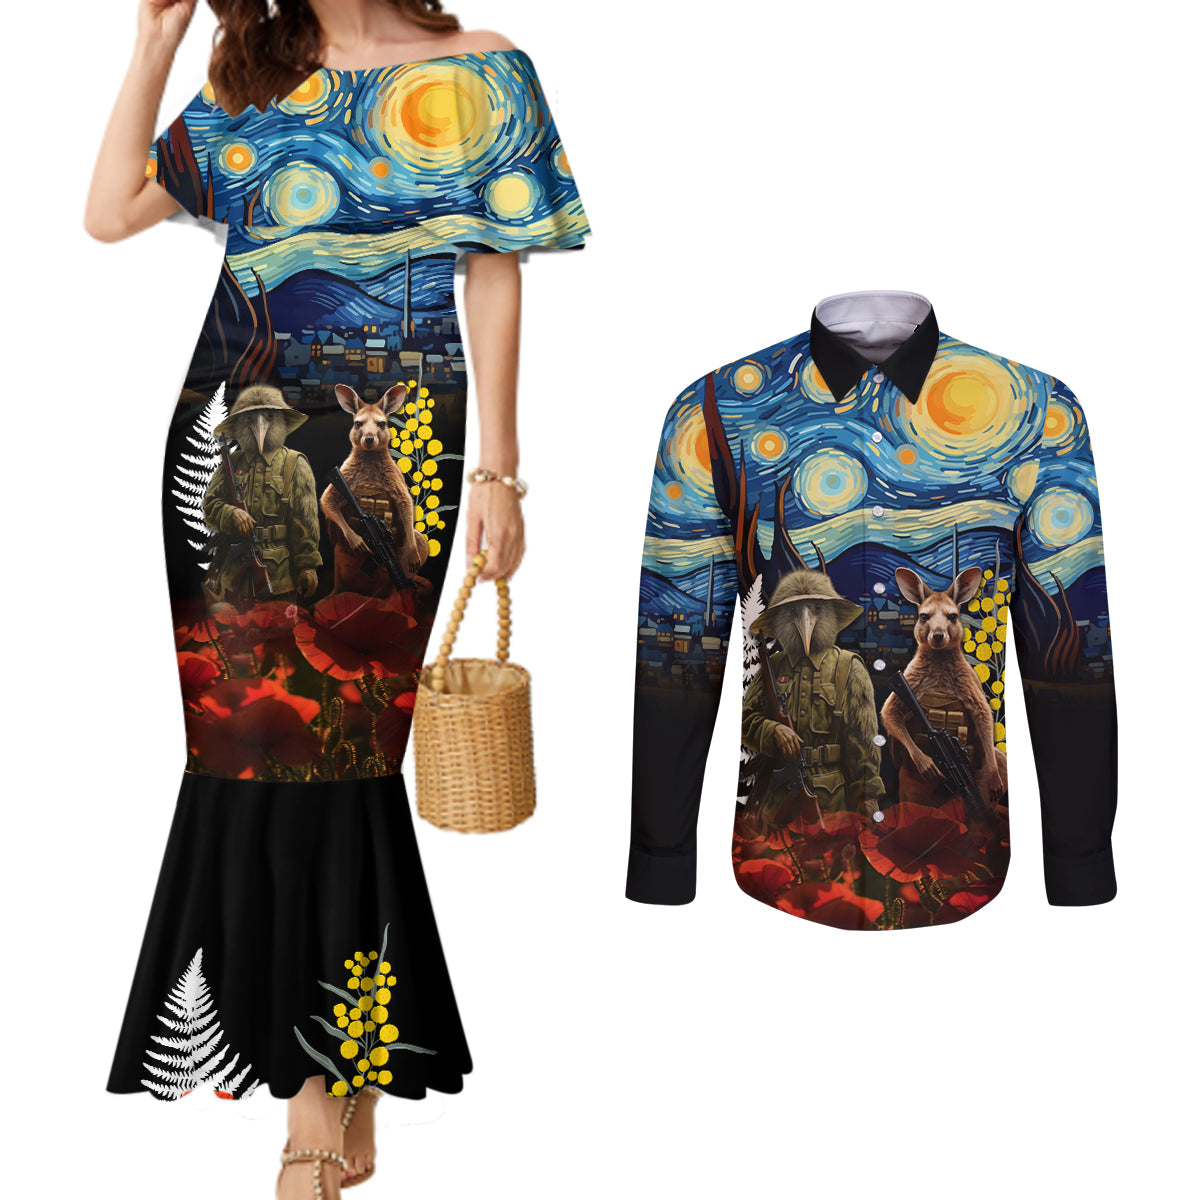 New Zealand and Australia ANZAC Day Couples Matching Mermaid Dress and Long Sleeve Button Shirt Kiwi Bird and Kangaroo Soldier Starry Night Style LT03 Black - Polynesian Pride